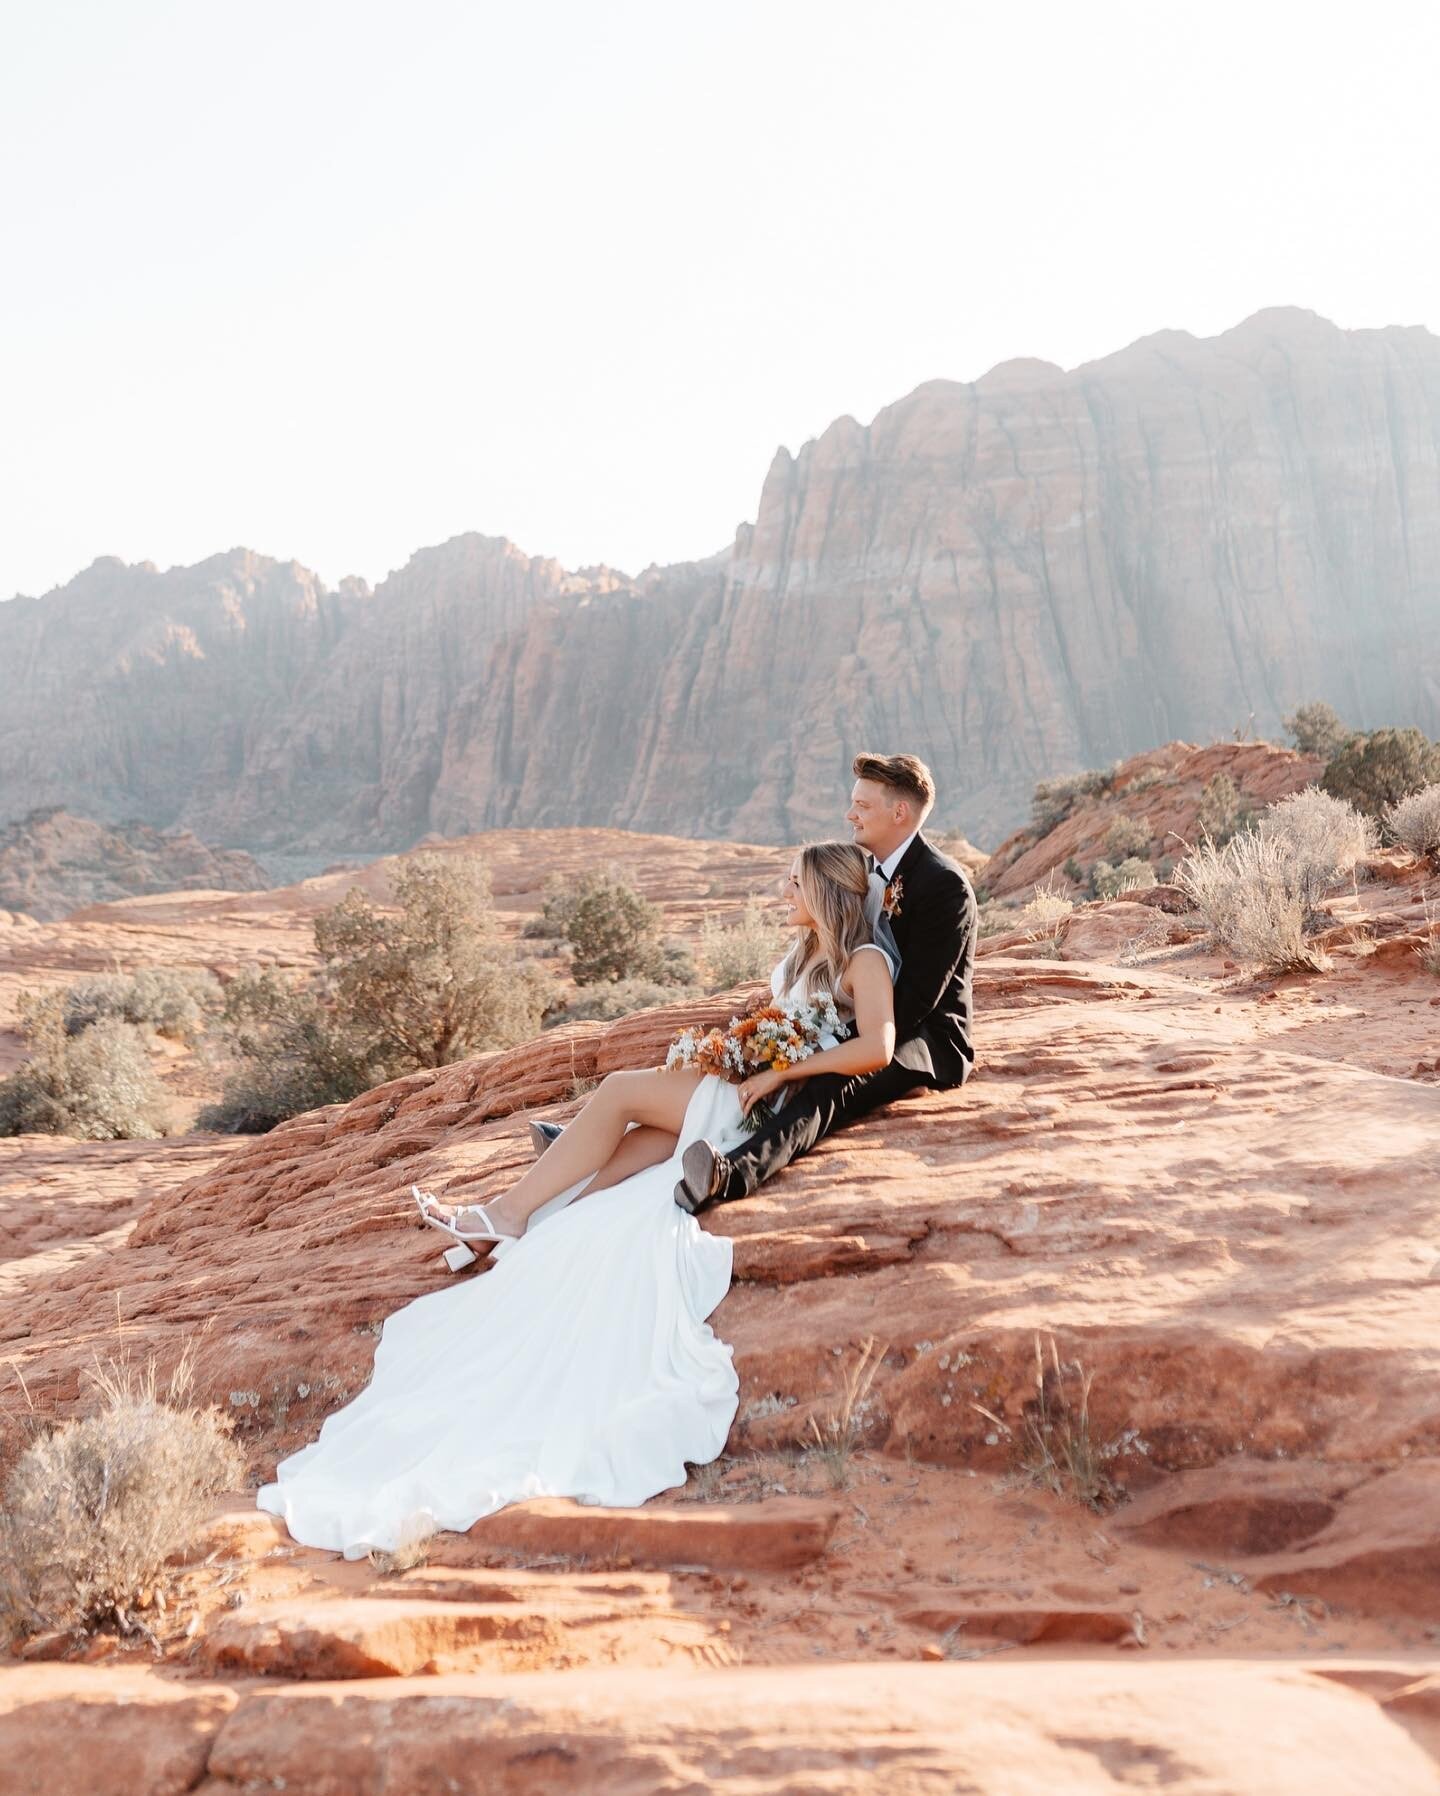 Still dying over this red rock elopement! ✨ These two took full advantage of the beauty and benefits of having an intimate wedding&mdash; dreamy location, relaxed timeline and celebrating with all of the people who matter most.&hearts;️

If you&rsquo